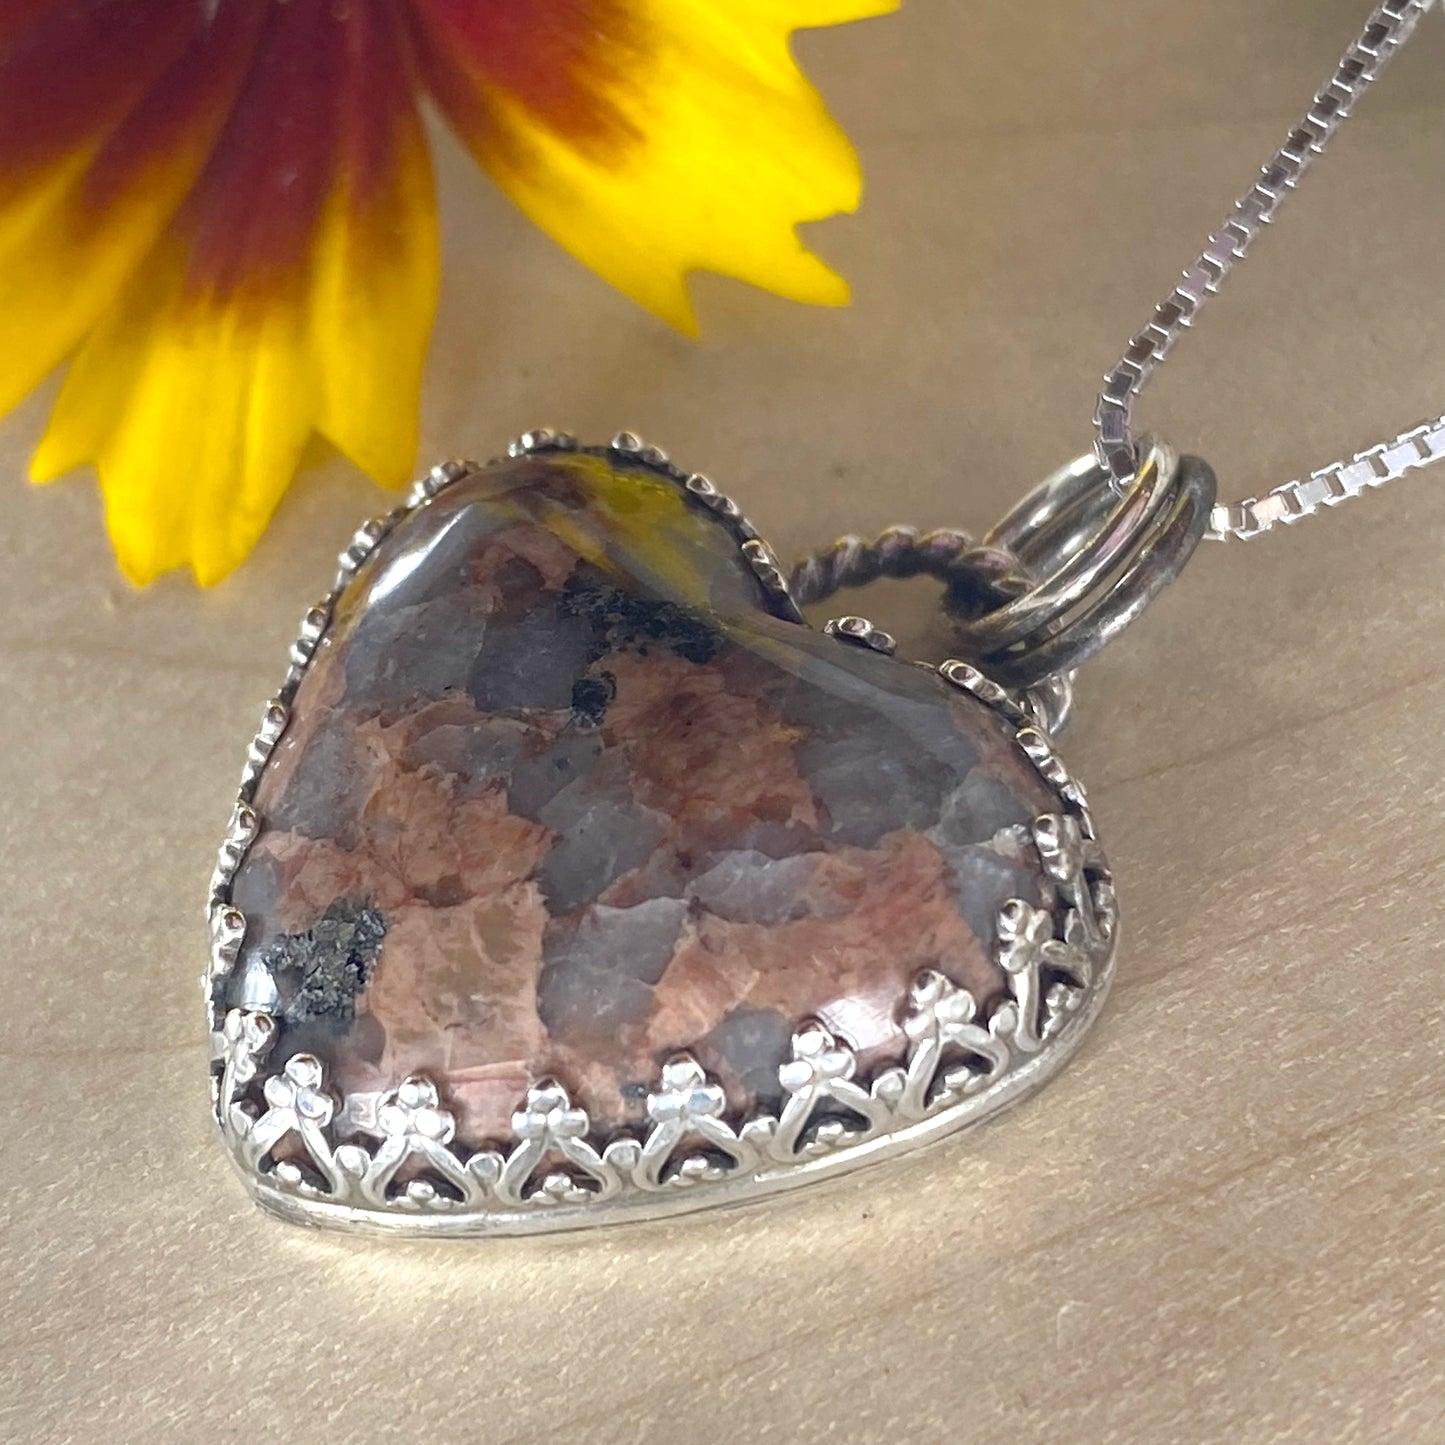 Granite Heart Pendant Necklace - Stone Treasures by the Lake